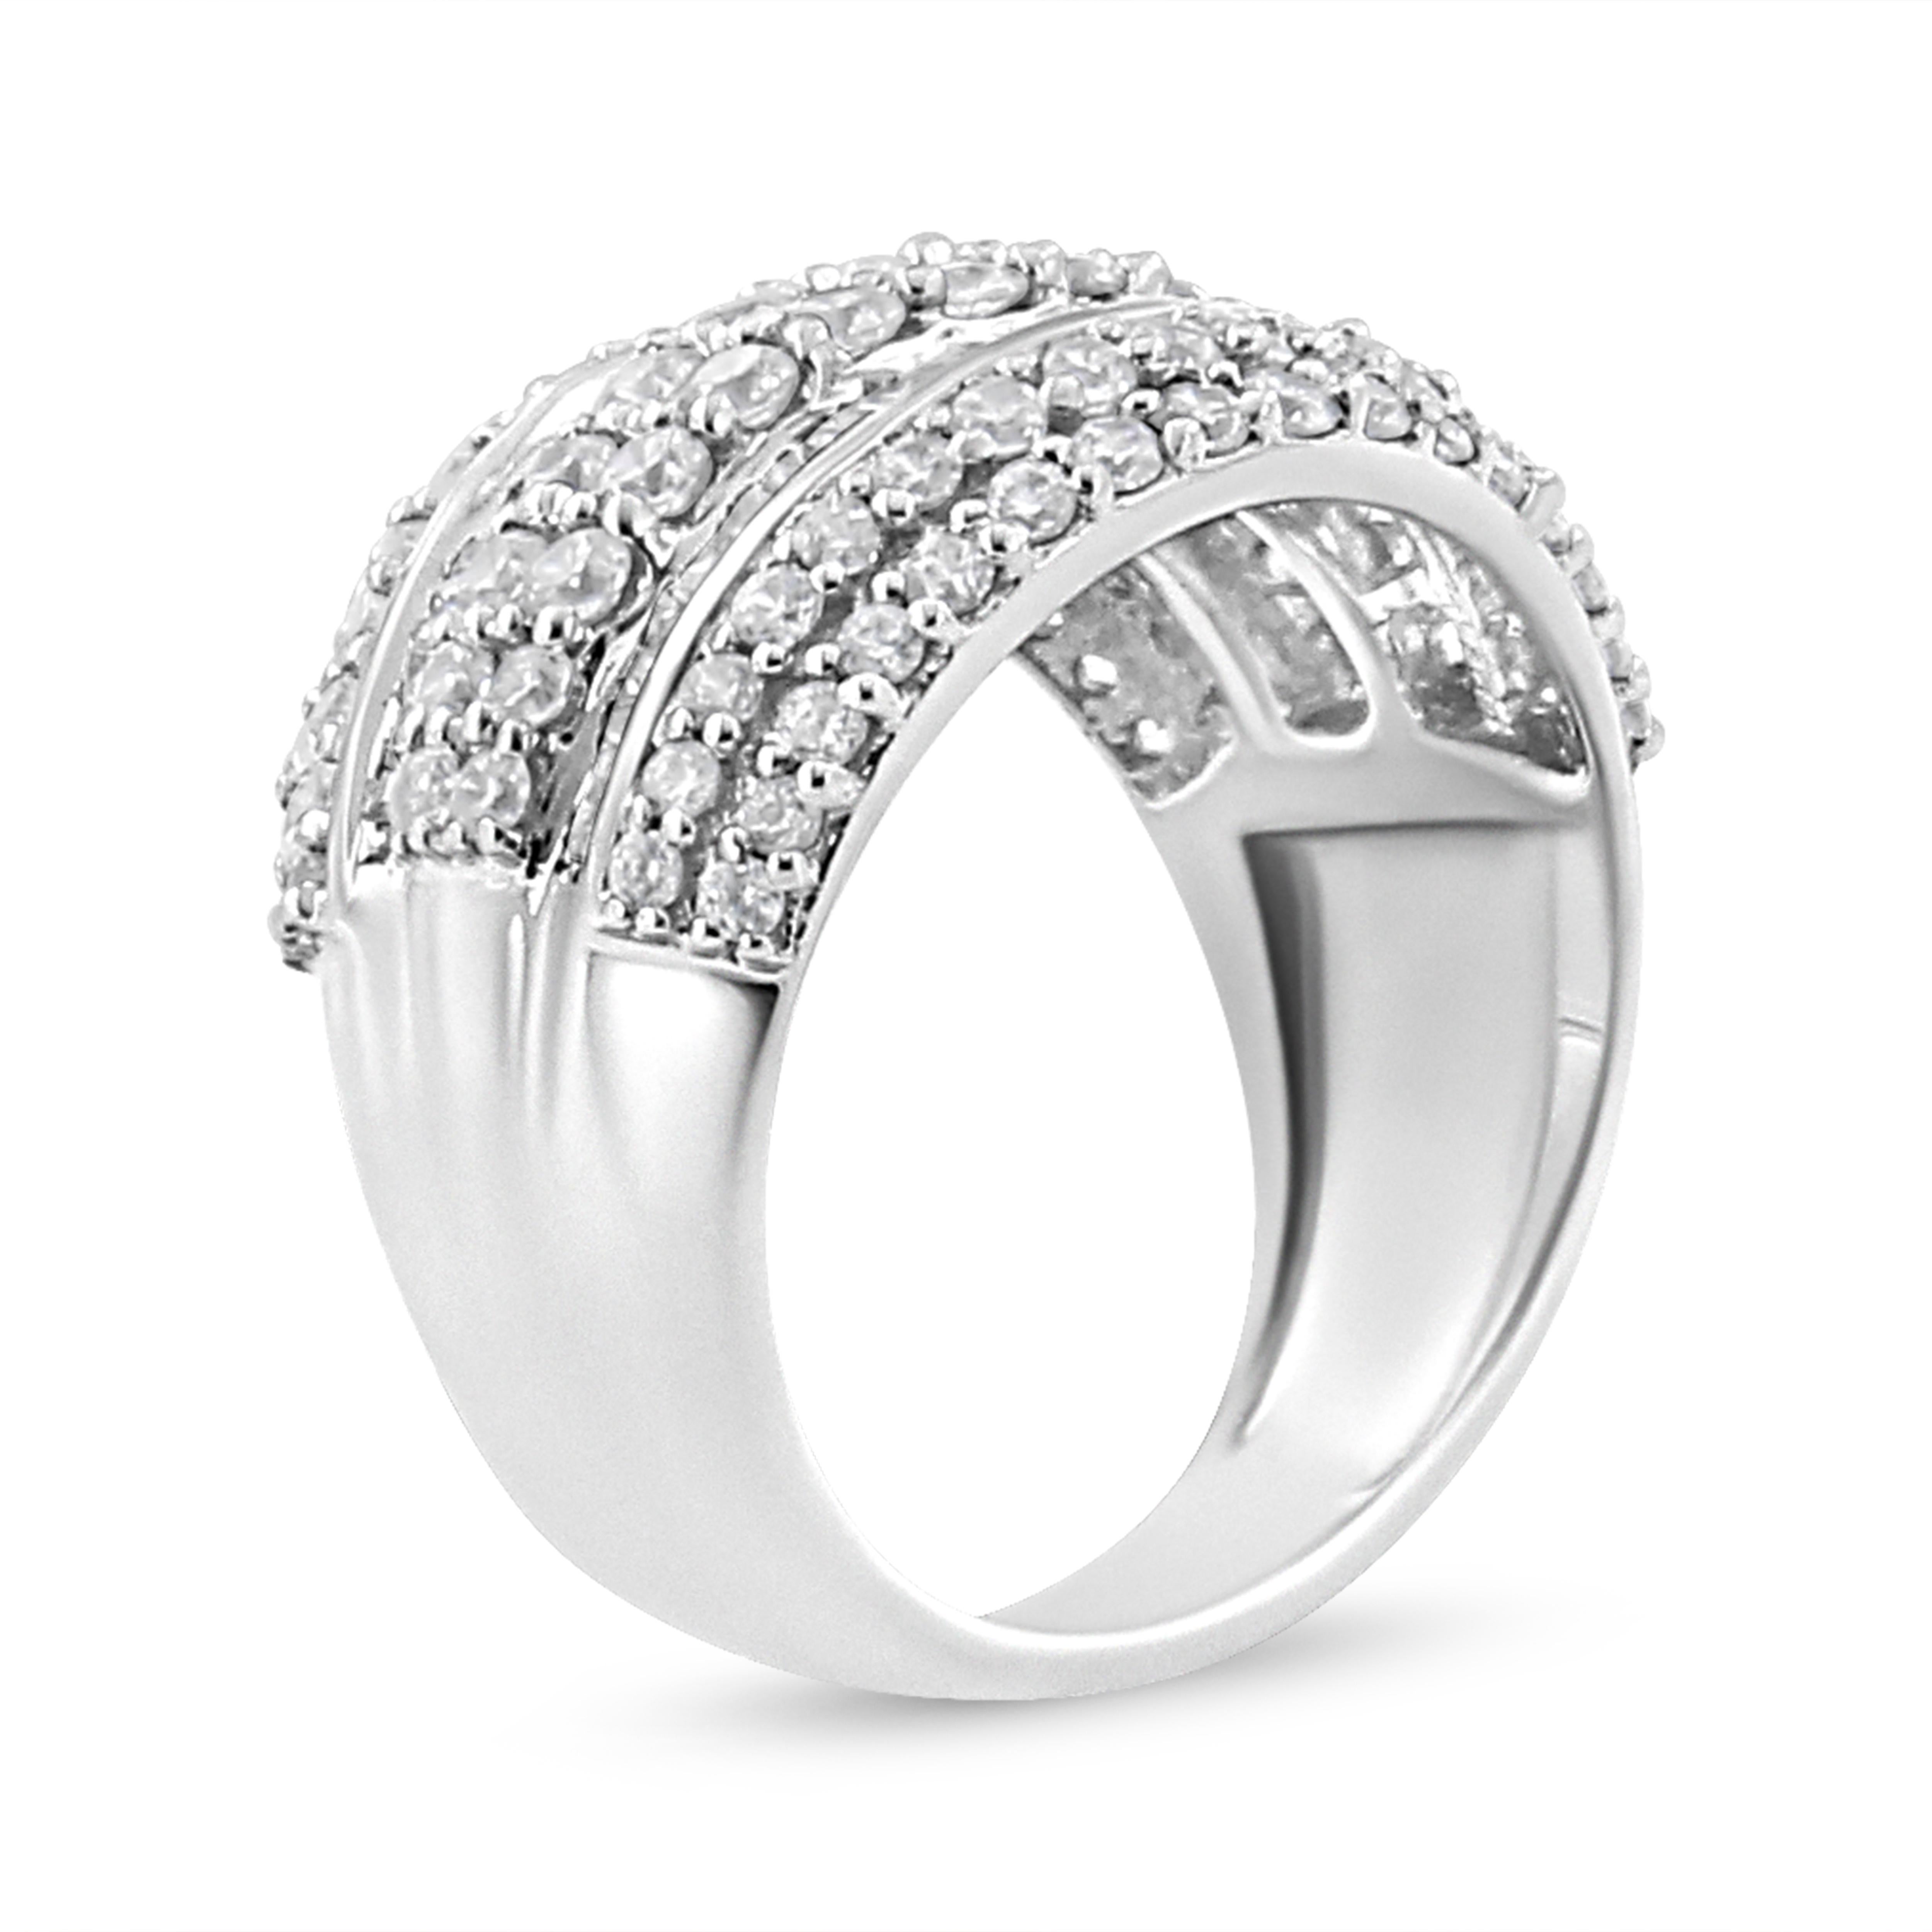 For Sale:  .925 Sterling Silver 2.0 Carat Round and Baguette-Cut Diamond Cluster Ring 3